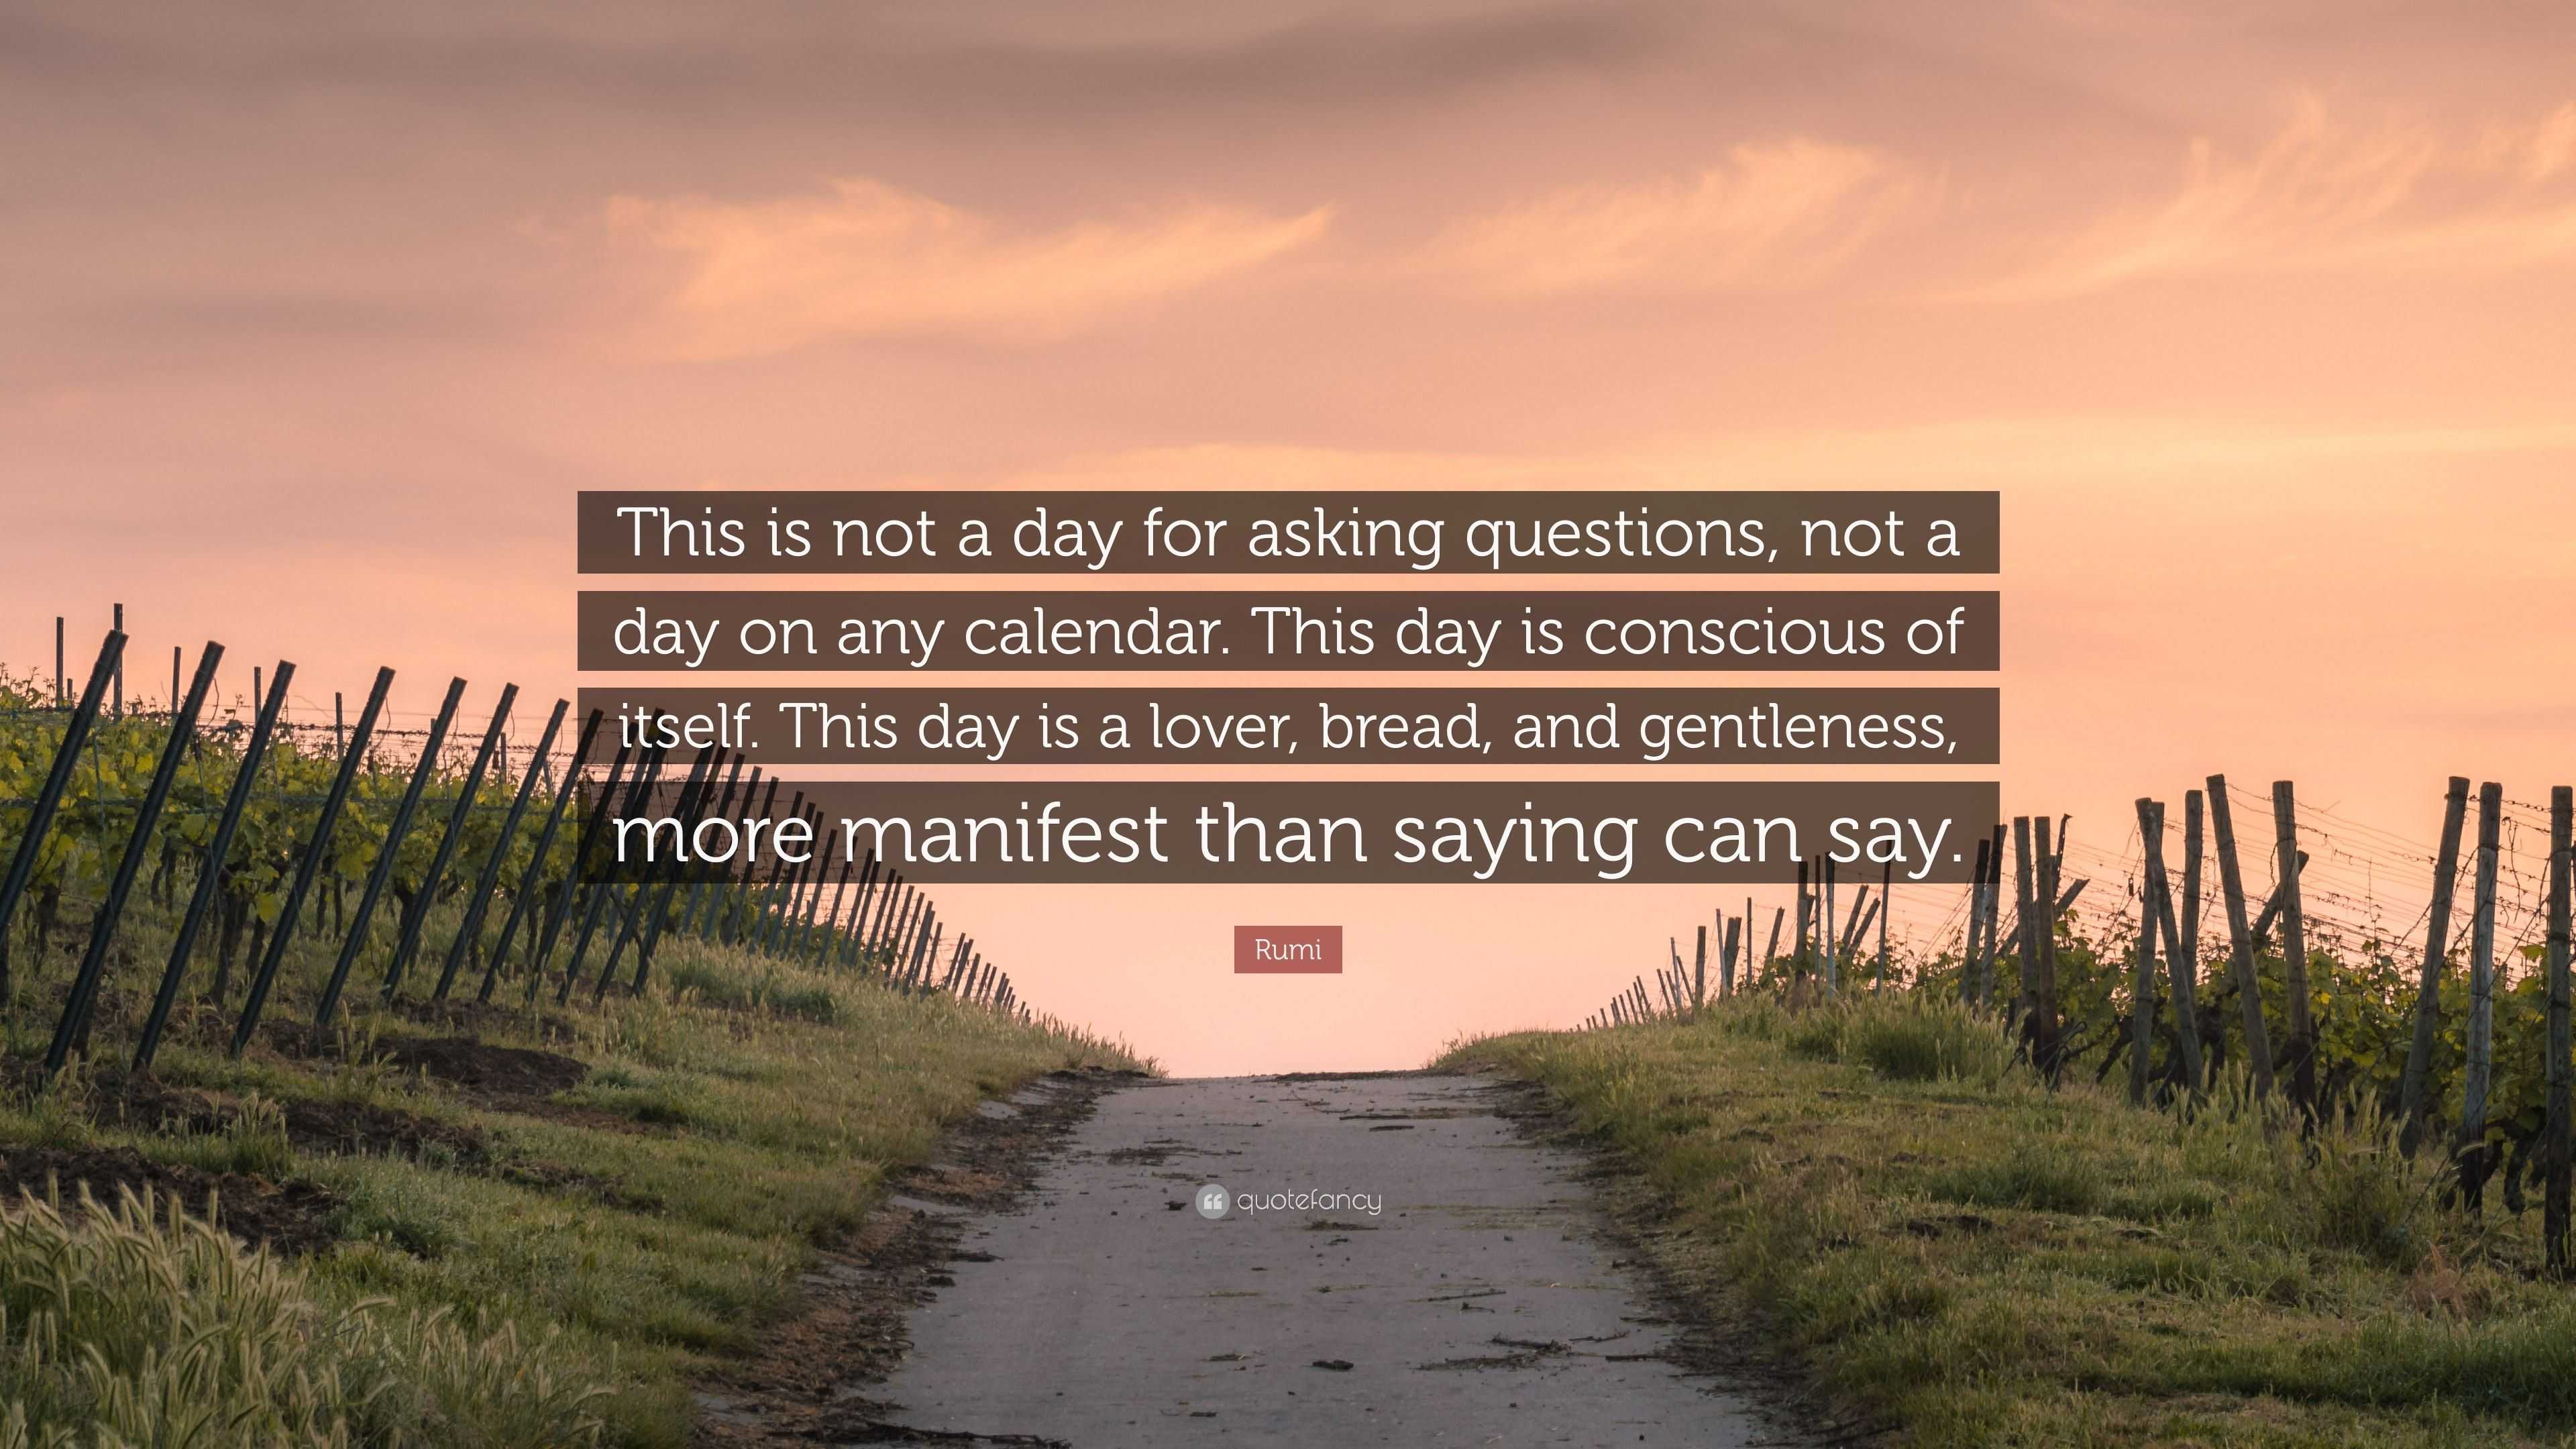 Rumi Quote “This is not a day for asking questions, not a day on any